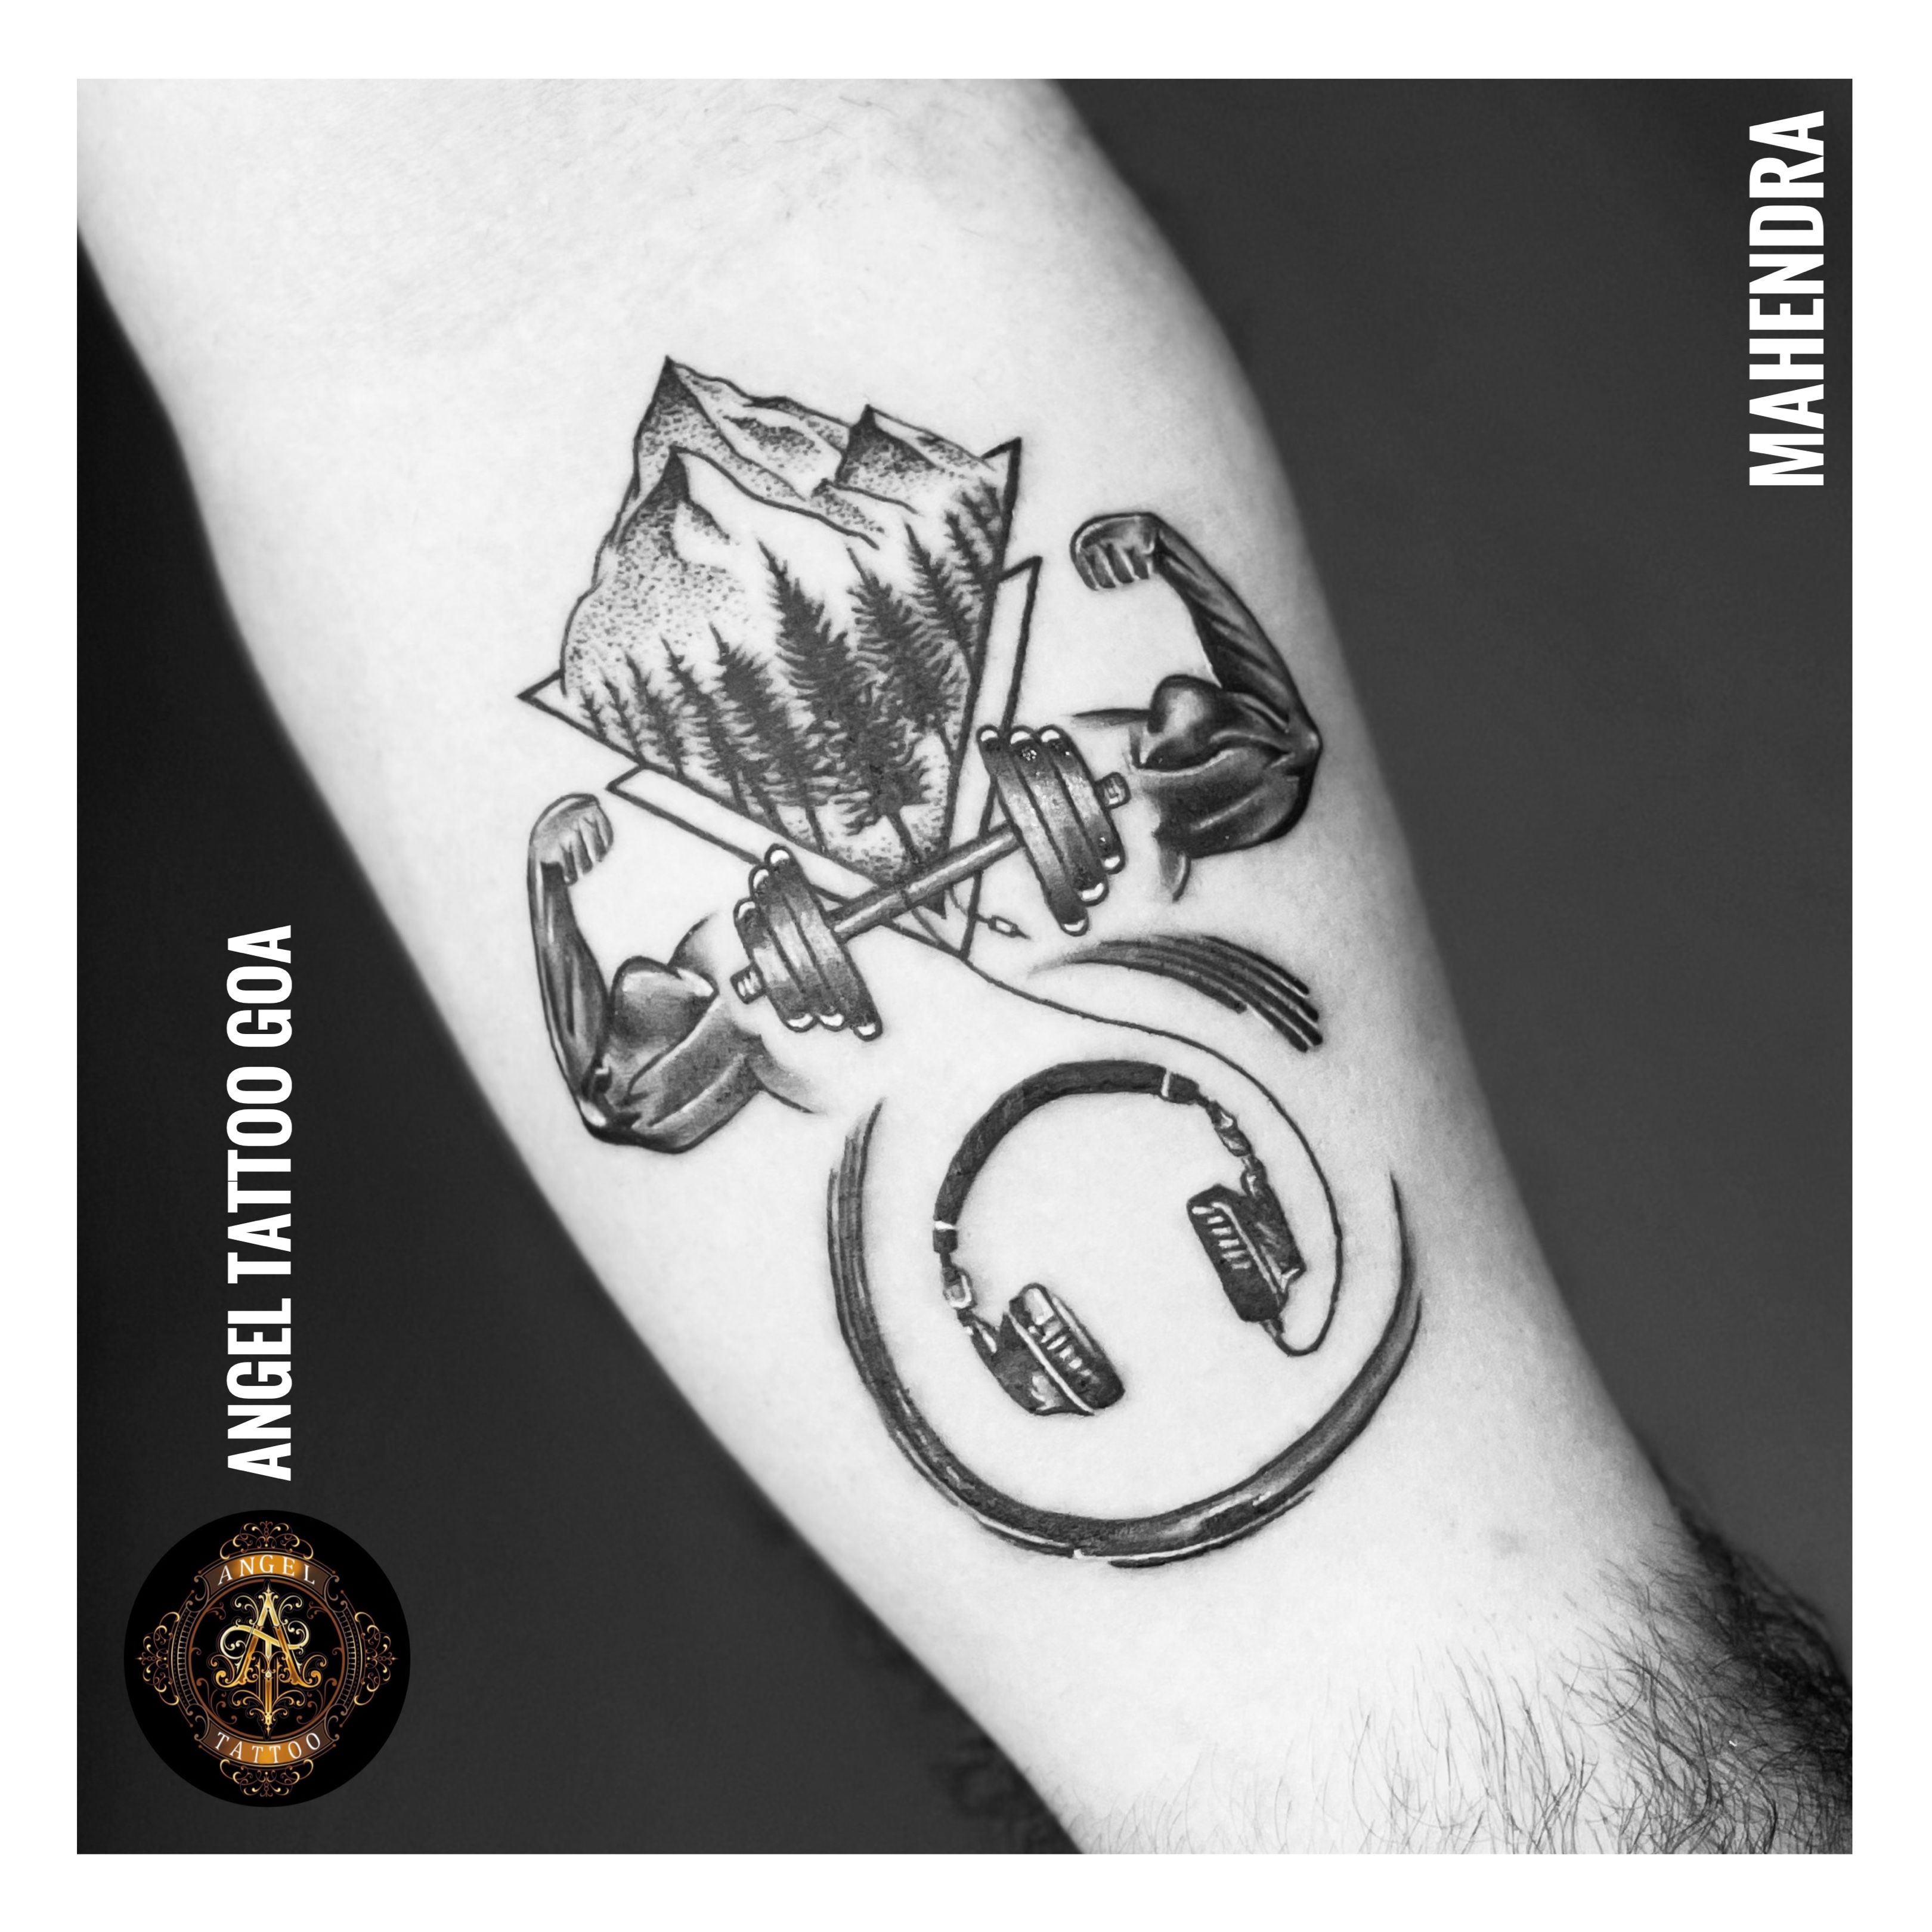 Tattoo uploaded by Angel Tattoo Goa - Best Tattoo Artist in Goa • Anchor  With Compass Tattoo By Mahendra Dharoliya At Angel Tattoo Goa, Best Tattoo  Artist in Goa, Best Tattoo Studio